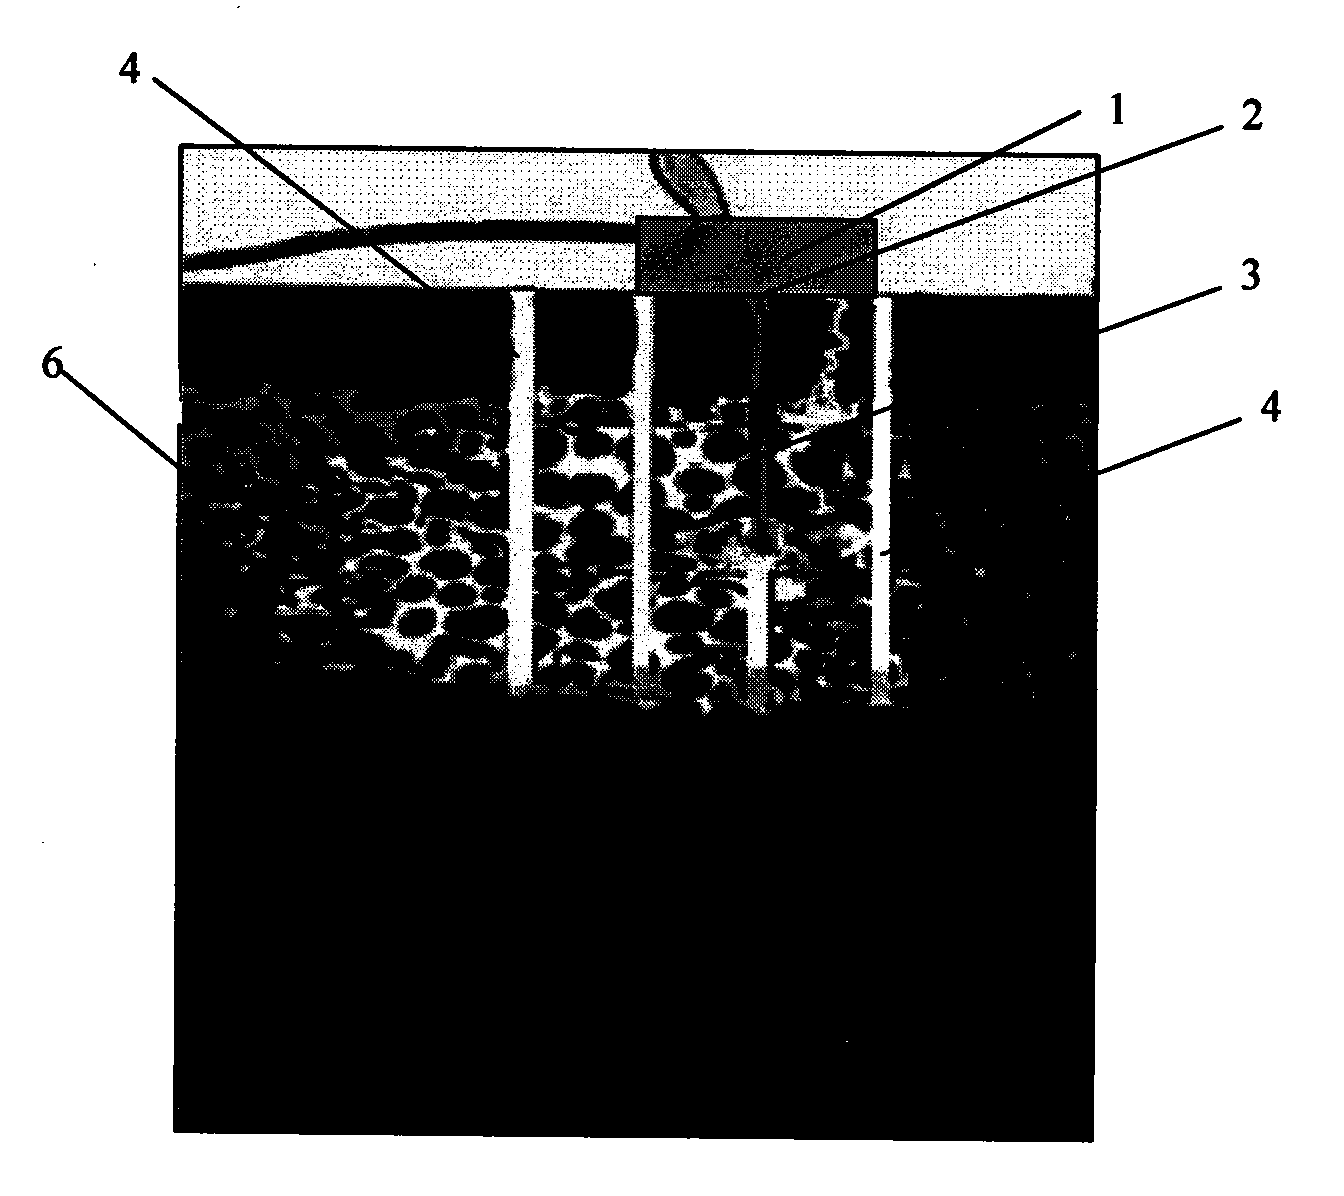 Road base reinforcing high-polymer loading and grouting method